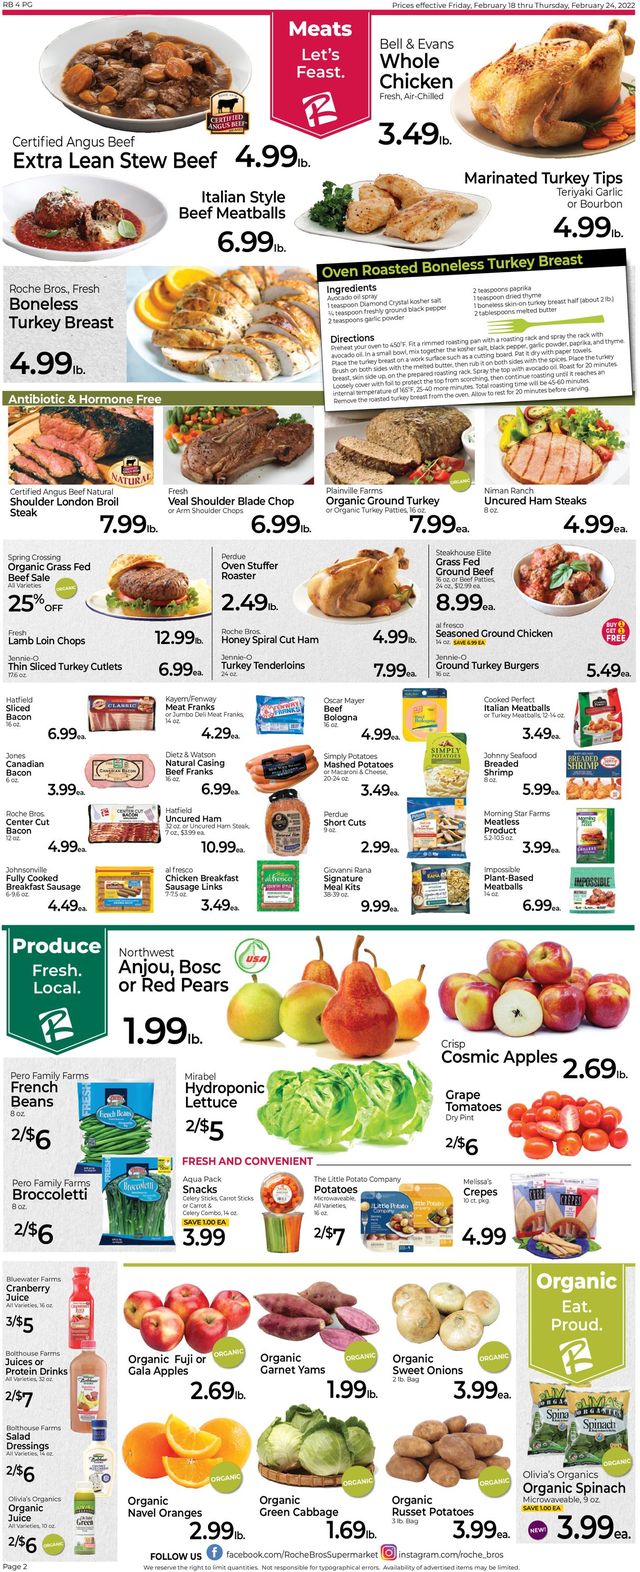 Roche Bros. Supermarkets Ad from 02/18/2022